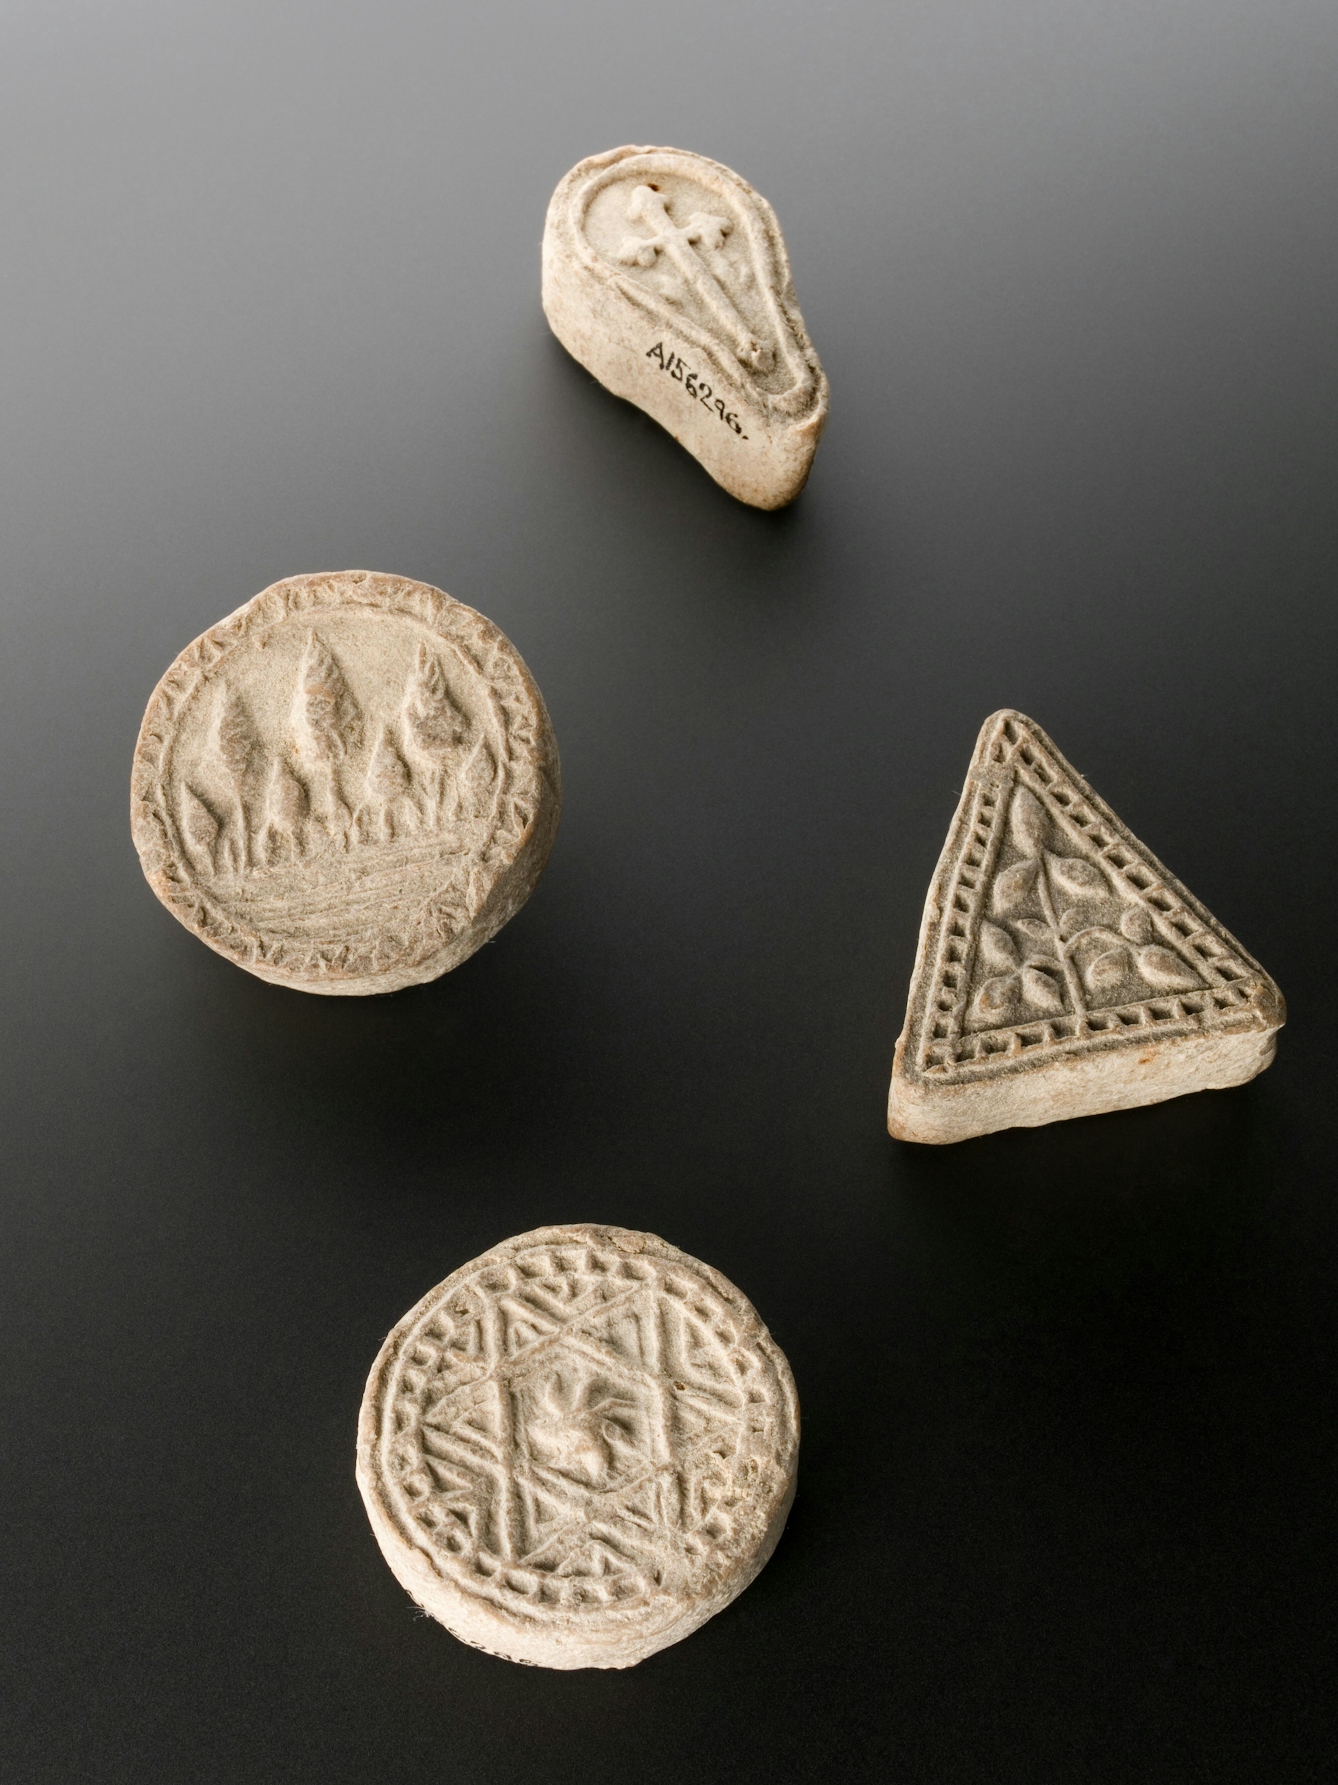 Photograph showing four shaped and decorated biscuits lying on top of a grey background. The top biscuit is an oval shape and has a Latin cross decoration. The second biscuit is circular and has a decoration of leaves on it. The third biscuit is triangular and has a similar leaf decoration. The fourth biscuit is circular and patterned with a star. 